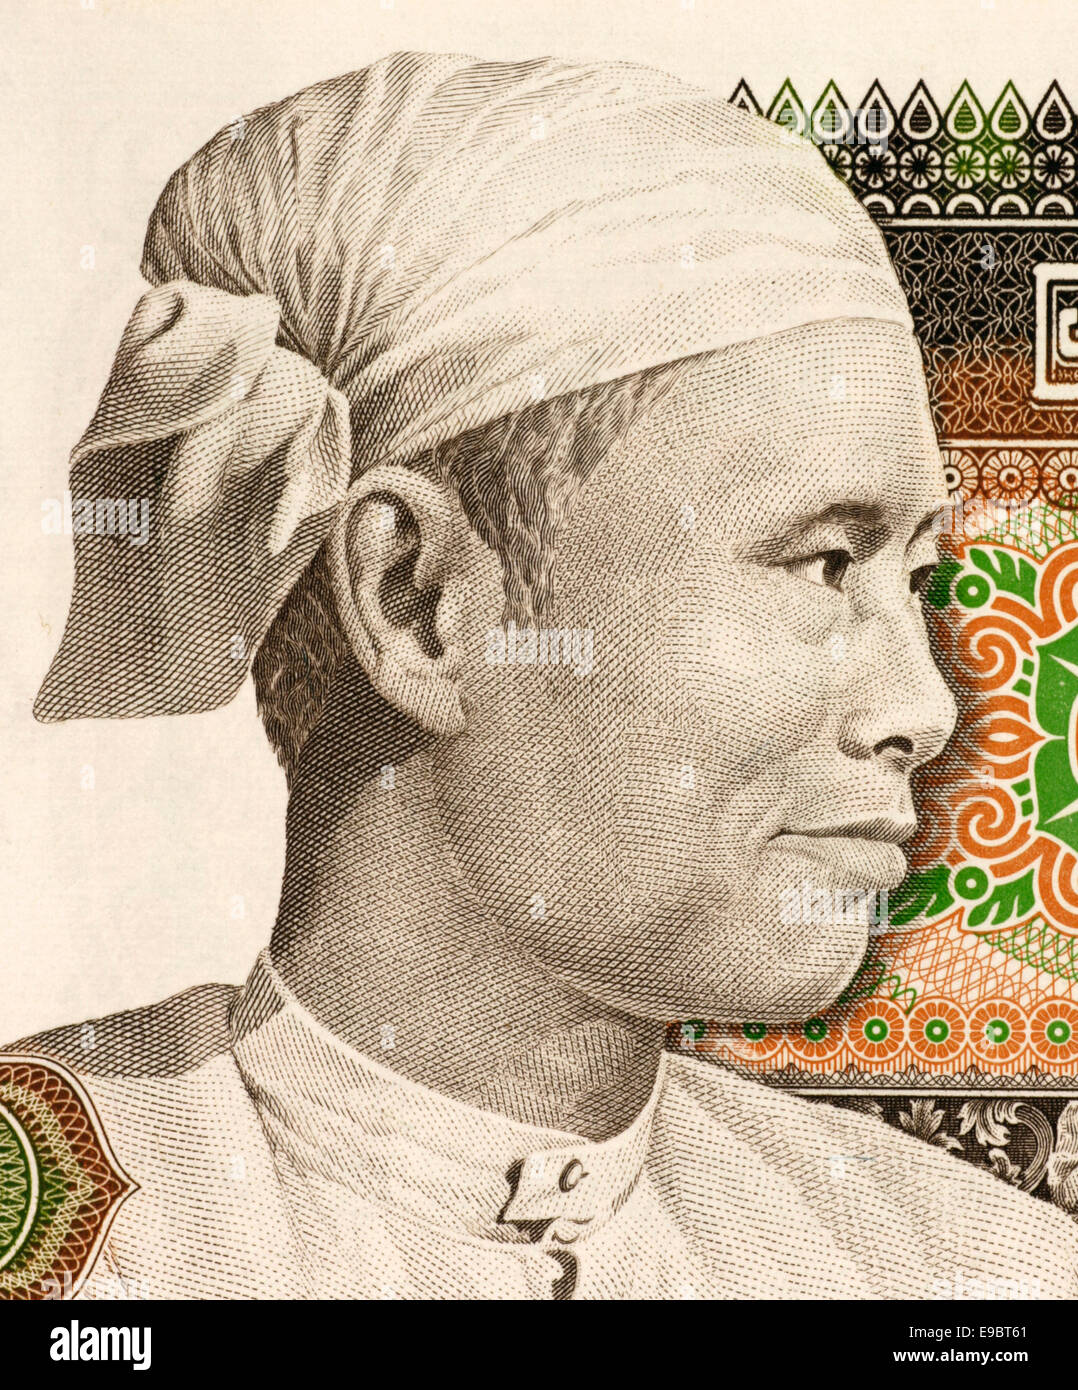 General Aung San (1915-1947) on 75 Kyats 1985 Banknote from Burma. Stock Photo